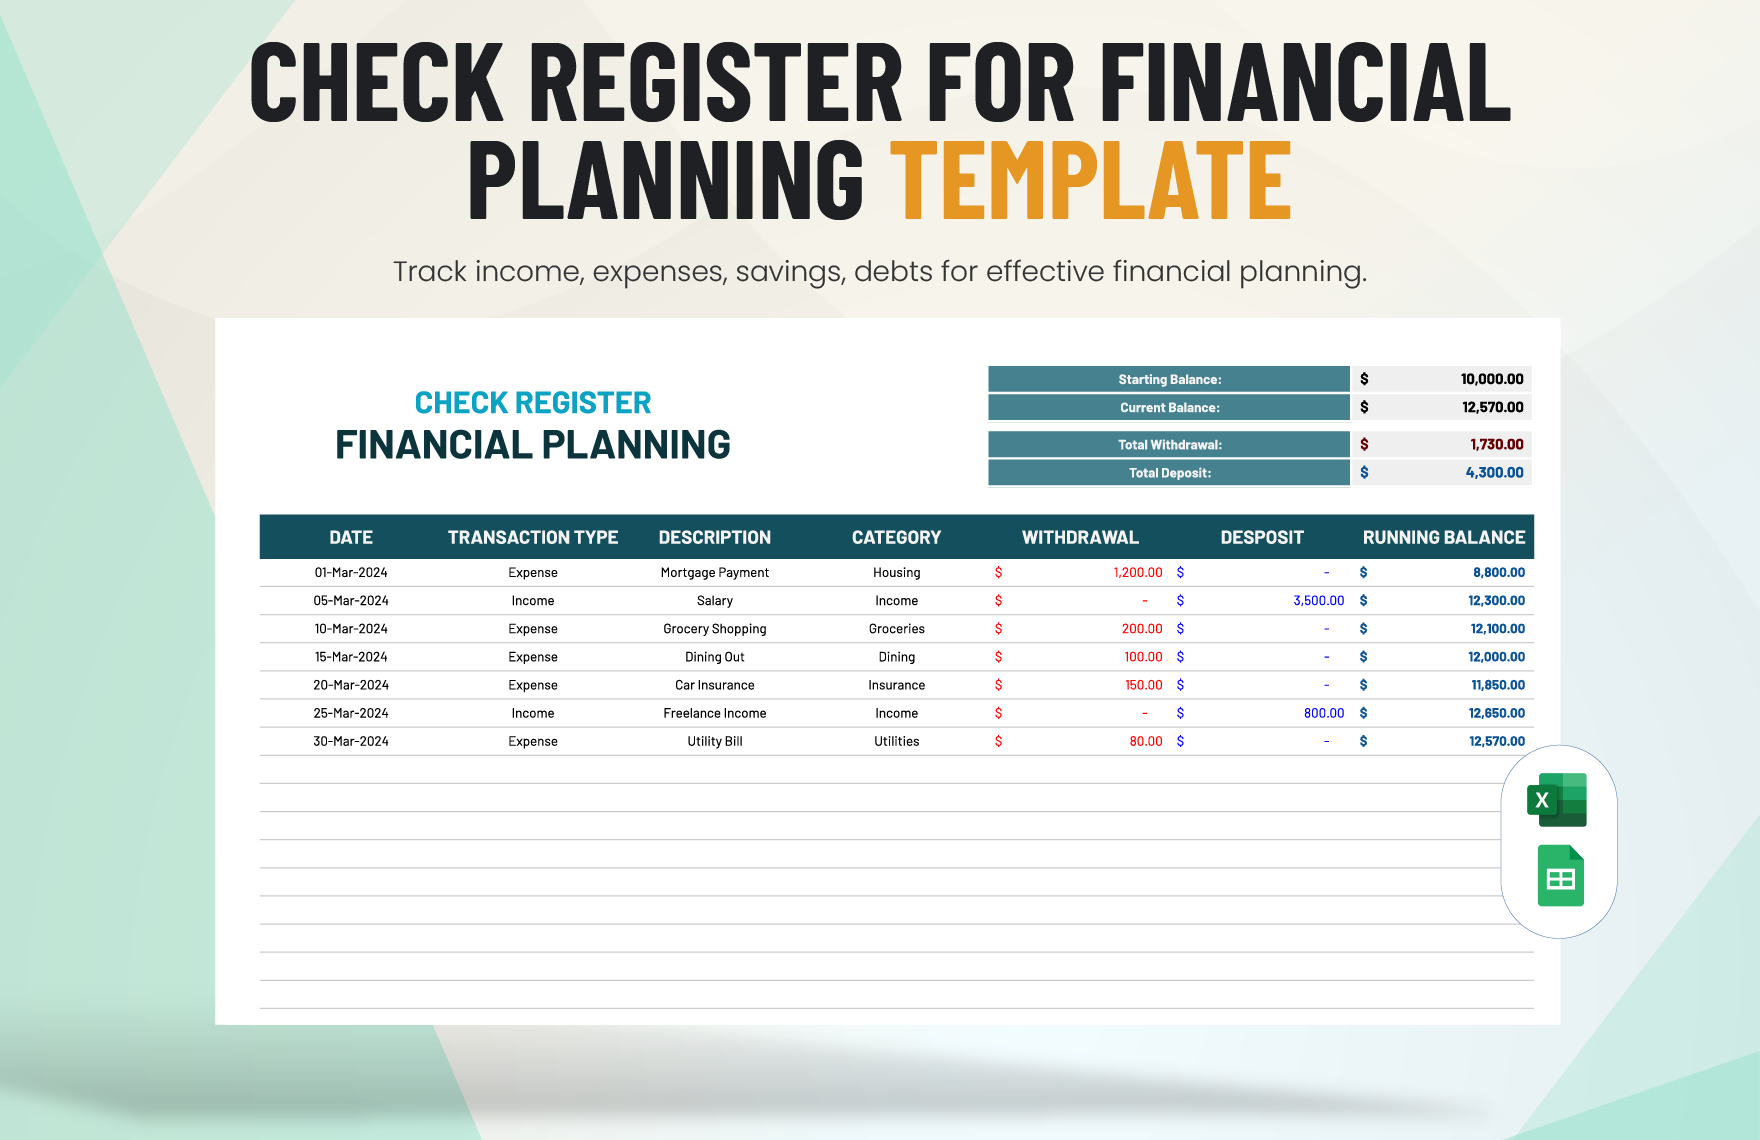 Check Register for Financial Planning Template in Excel, Google Sheets